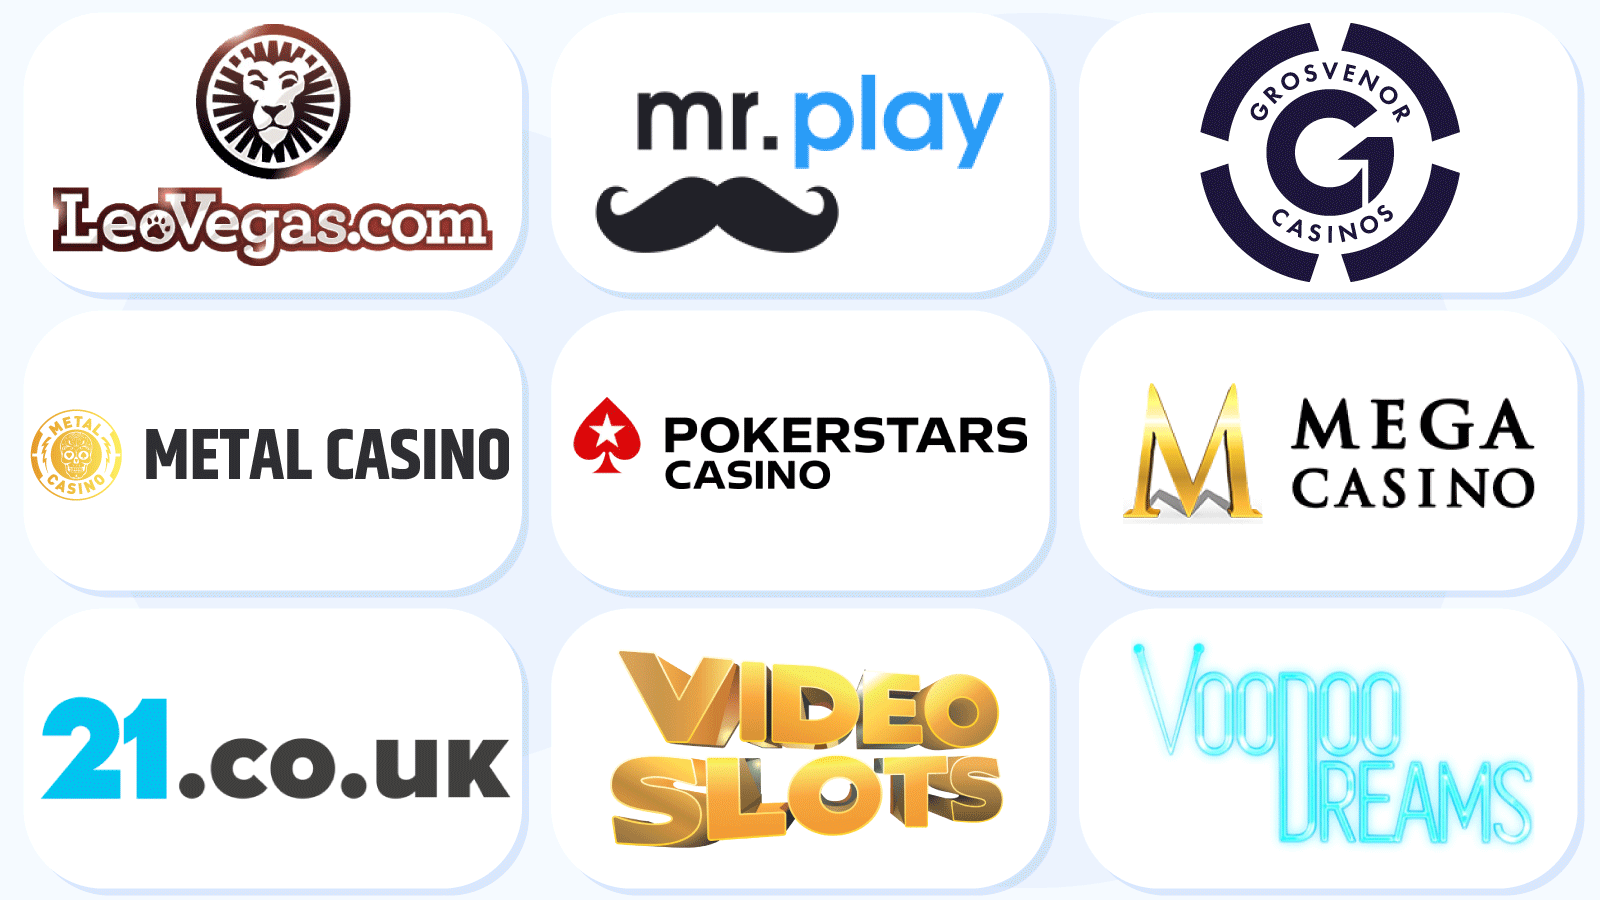 Our Top Picks for Live Android Casinos